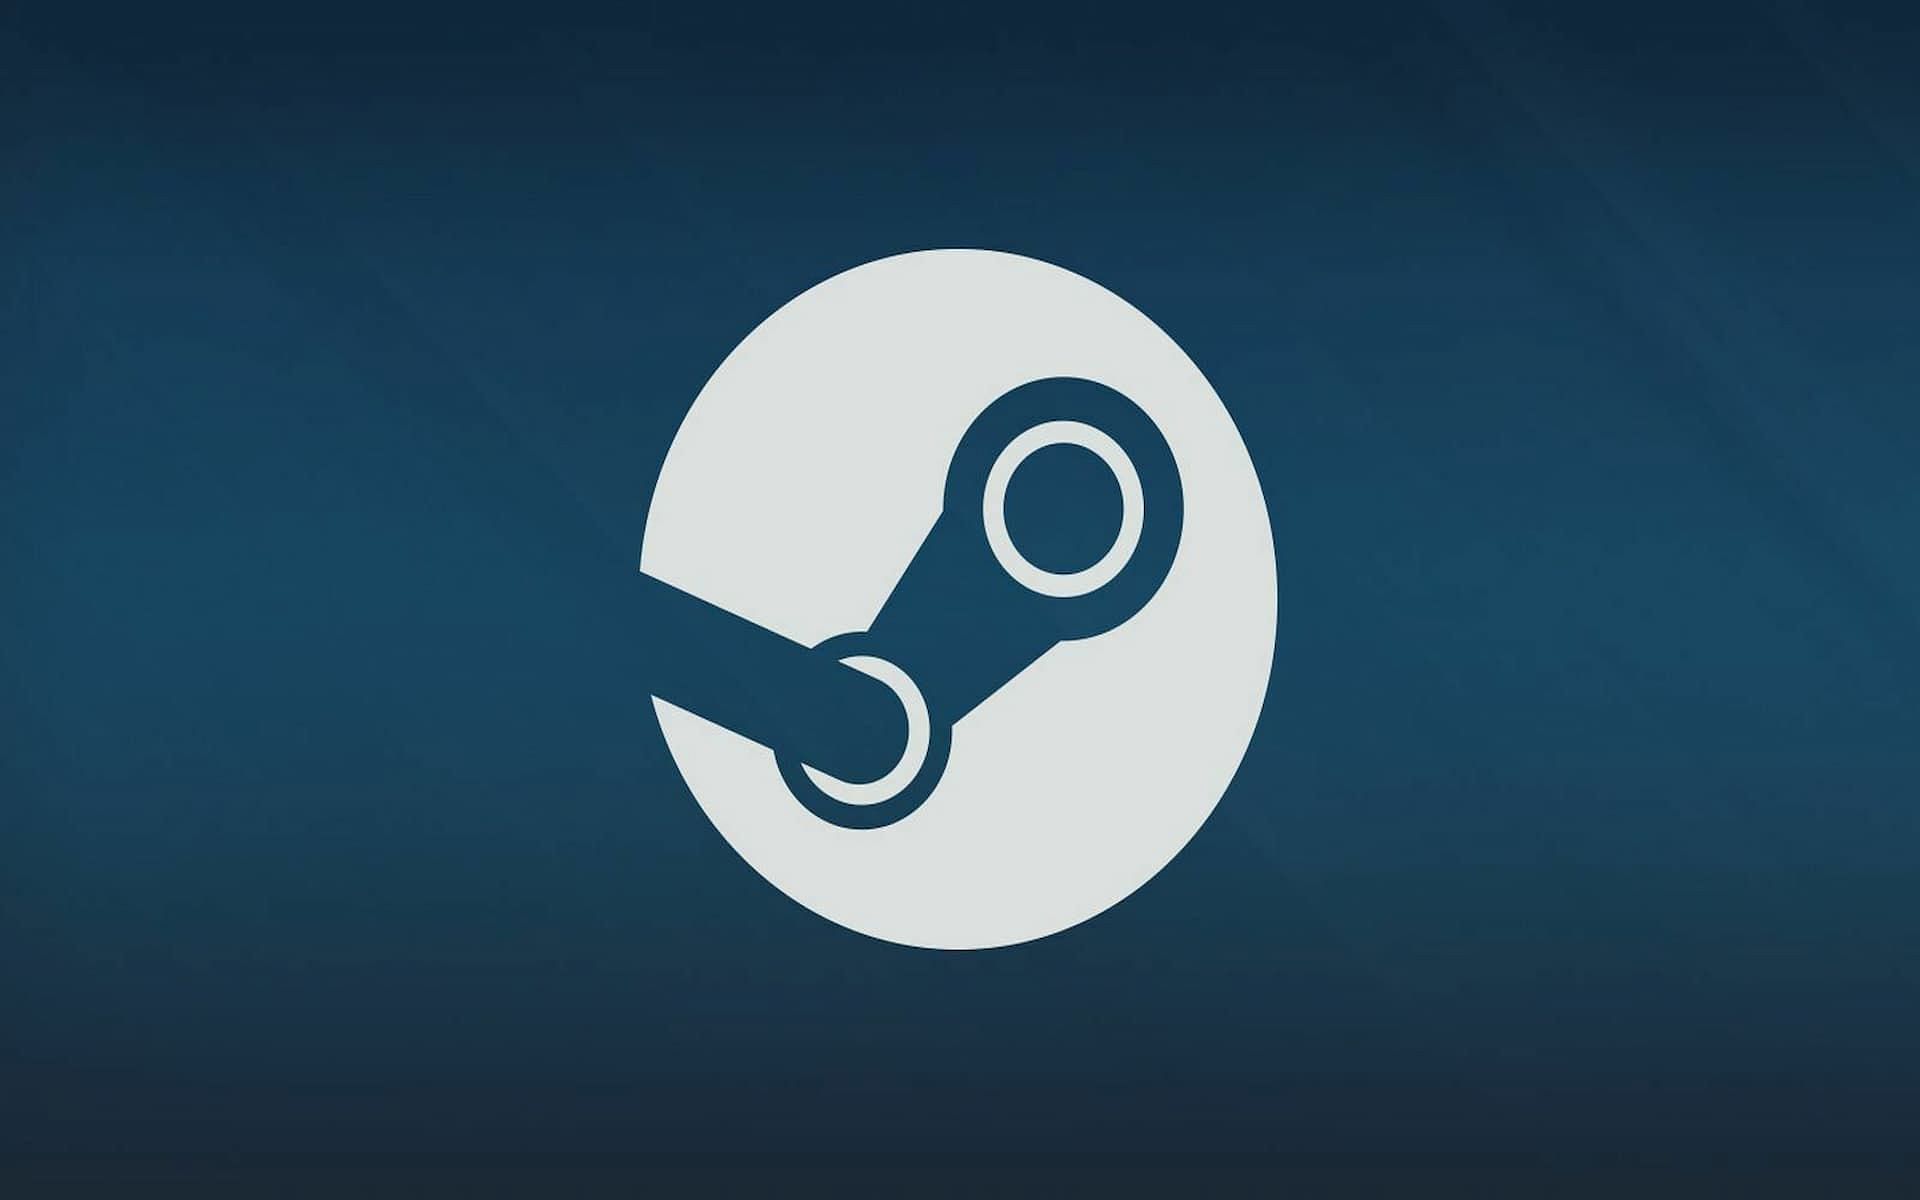 Valve has created a home to thousands of PC games (Image via Valve)